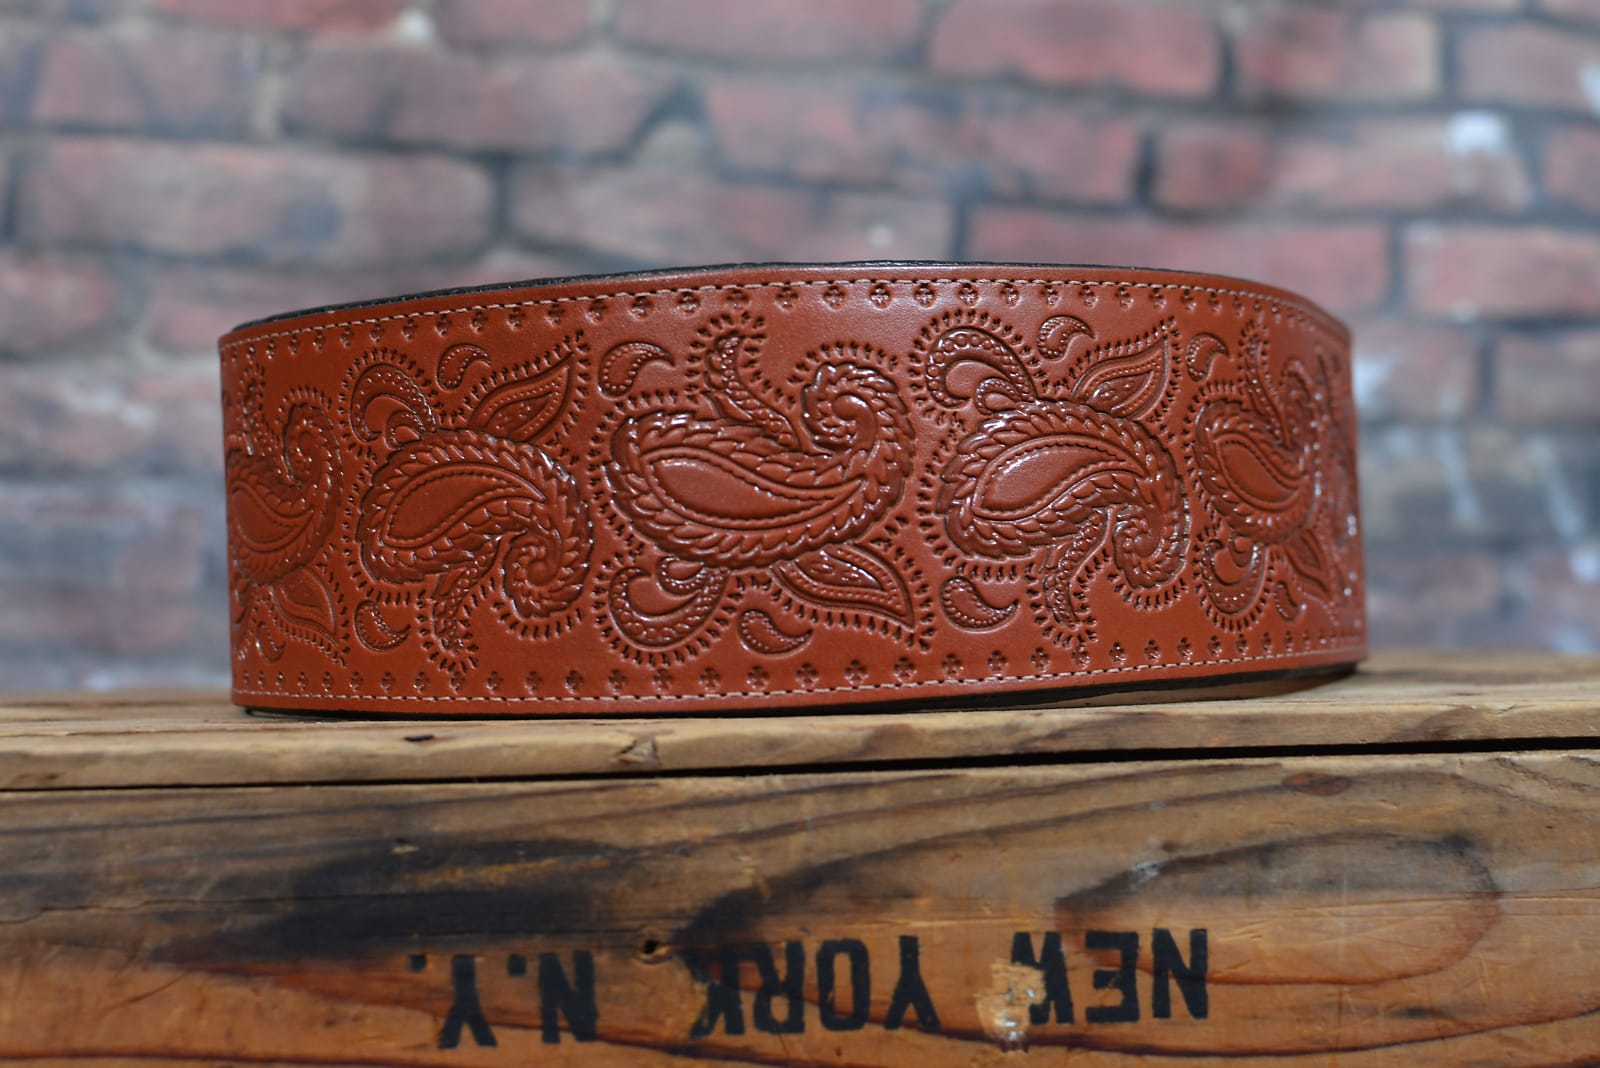 Levy's Levy's Leather Tooled Guitar Strap w/Music Notes - John